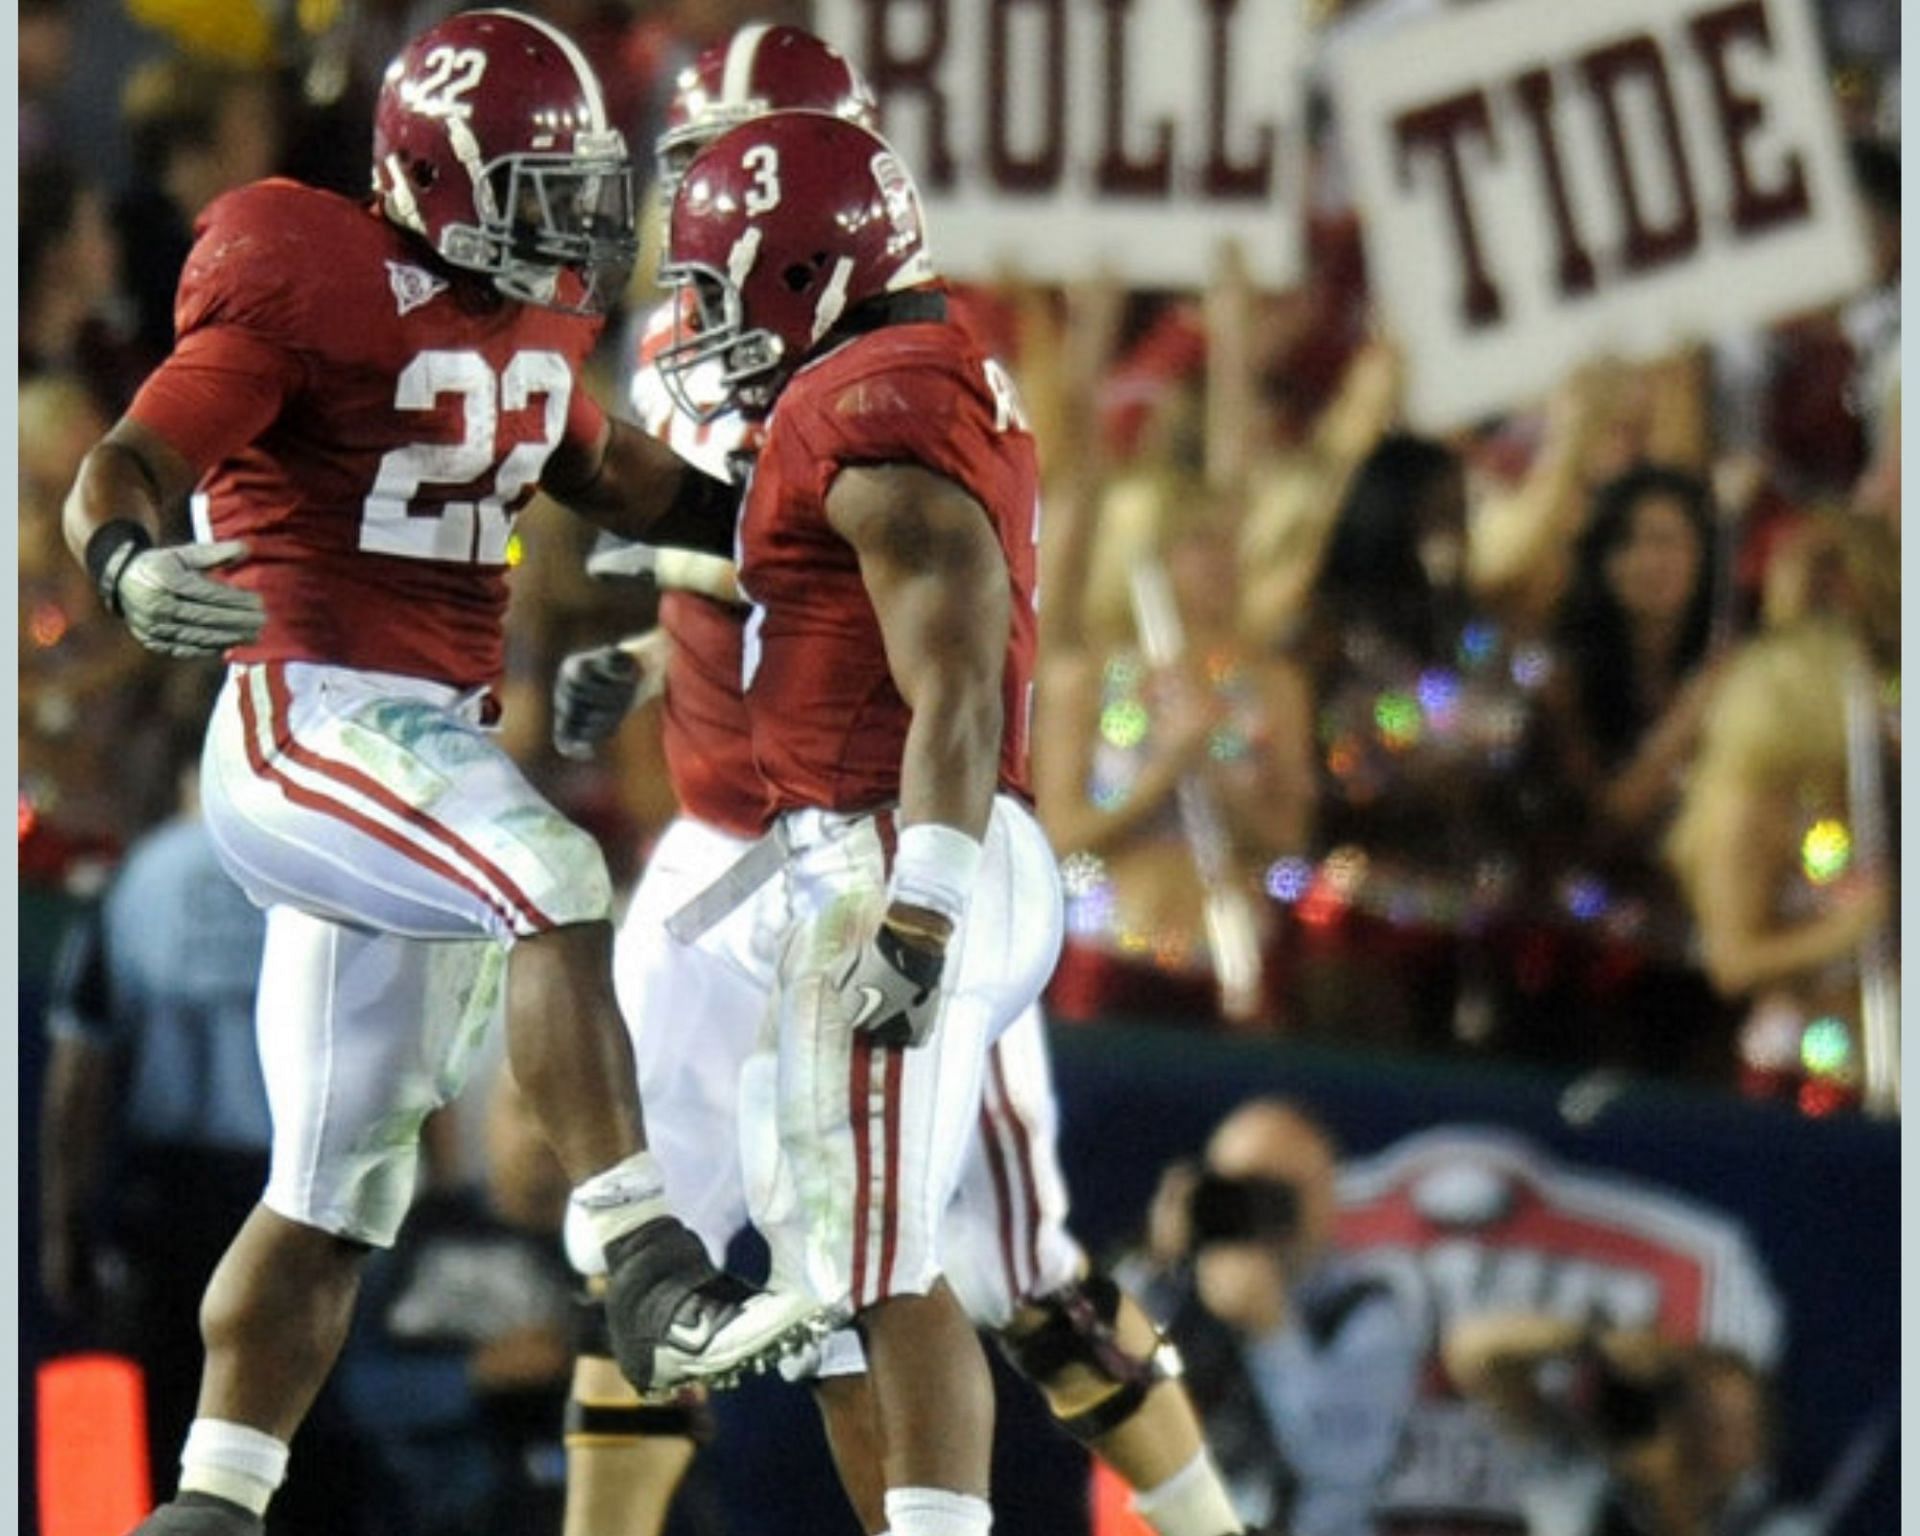 Alabama Crimson Tide players during the 2010 national championship game